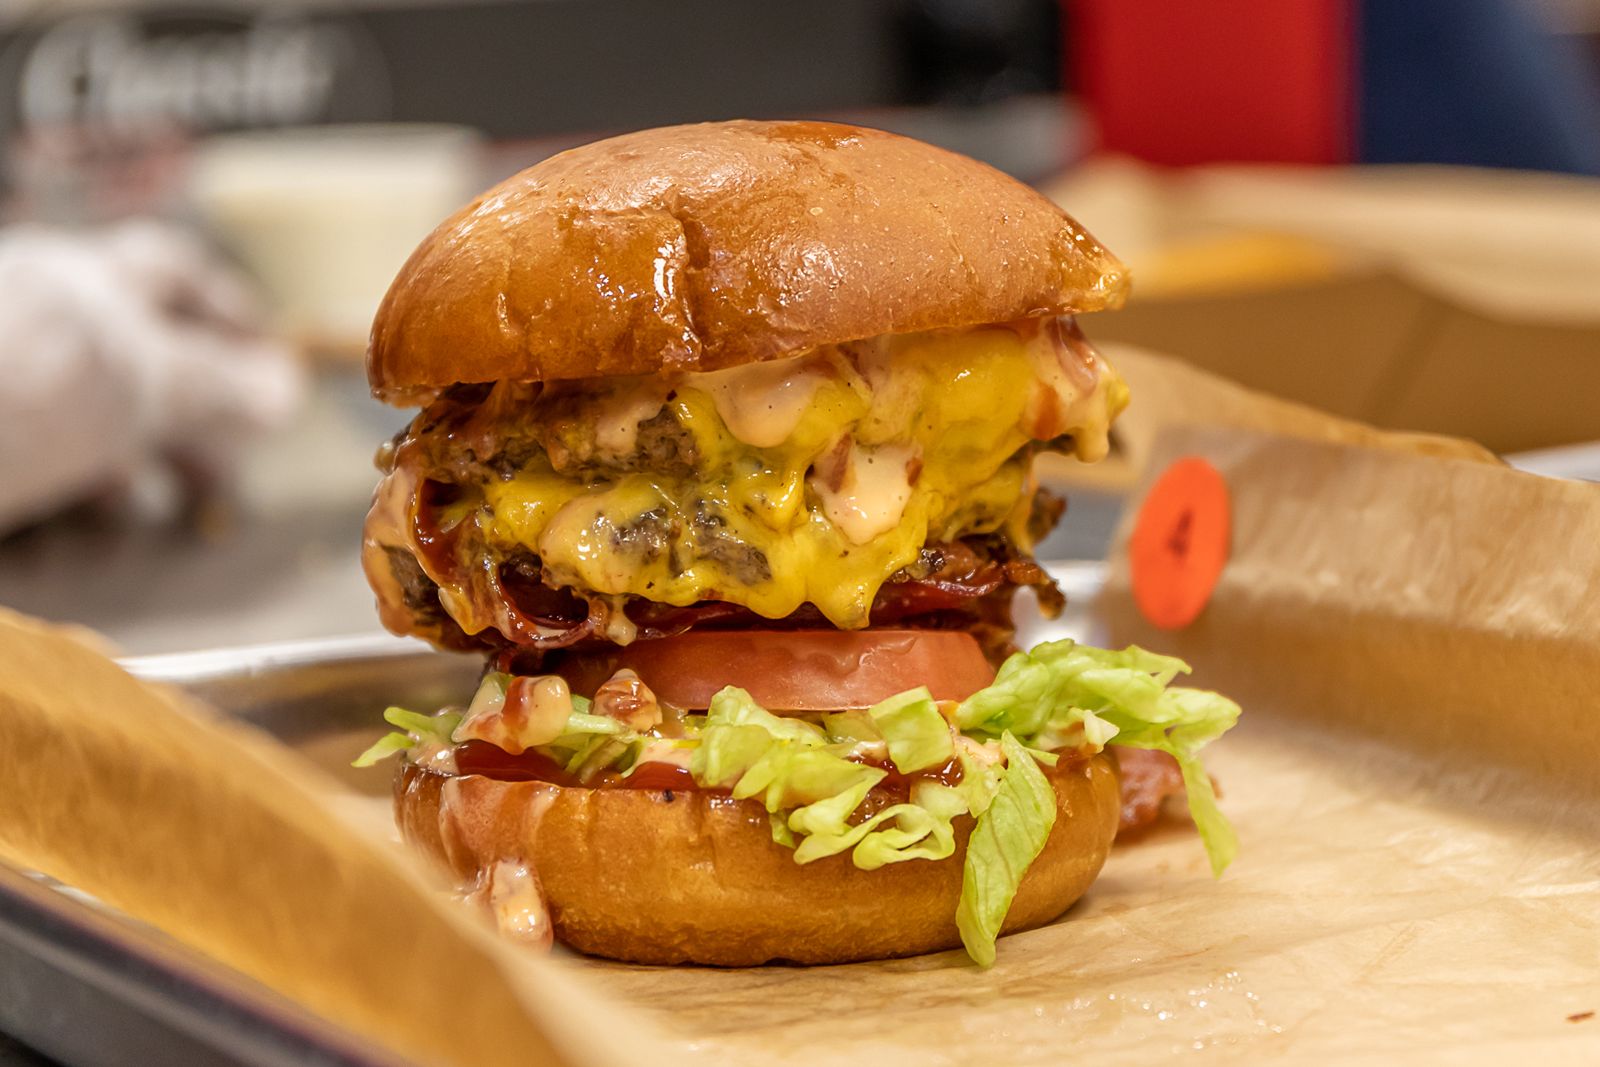 MOOYAH Burgers, Fries & Shakes Partners with Agape Management to Bring 10 New Restaurants to Dallas and to Remodel Two Existing Locations as They Assume Ownership